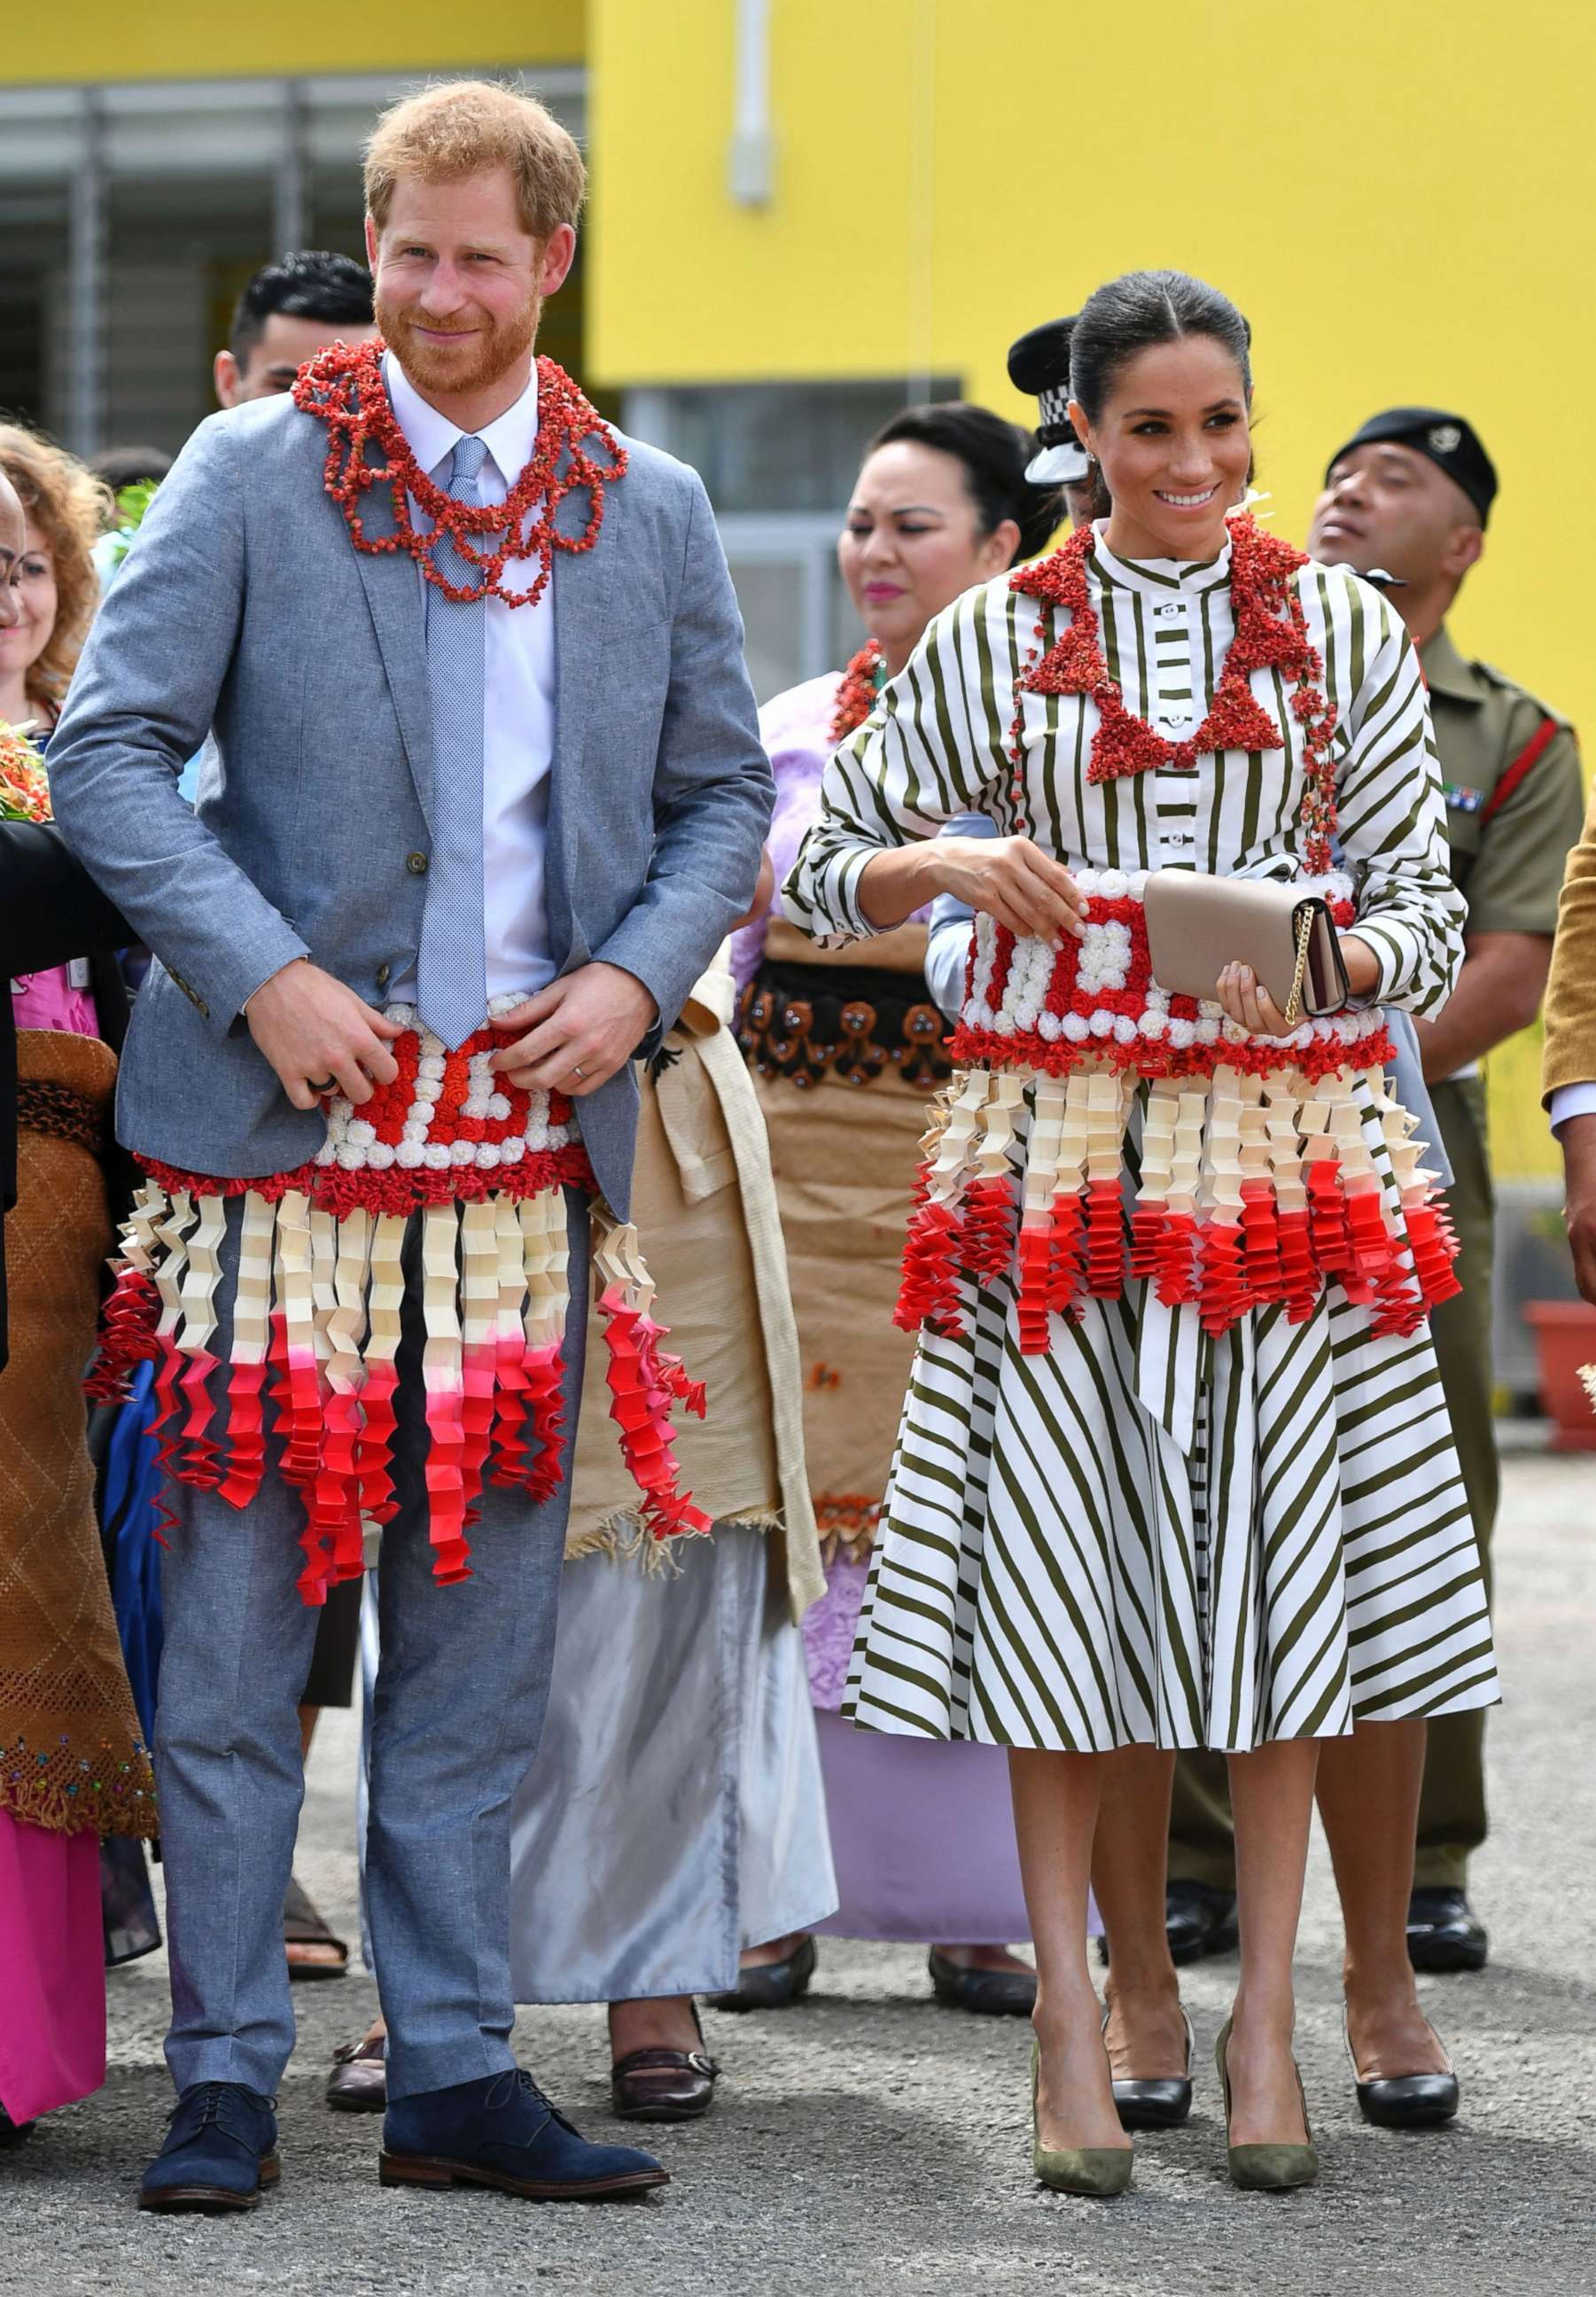 PHOTO: Prince Harry and his wife Meghan visit an exhibition of Tongan handicrafts, mats and tapa cloths at the Fa'onelua Convention Centre in Nuku'alofa, Tonga, Oct. 26, 2018.